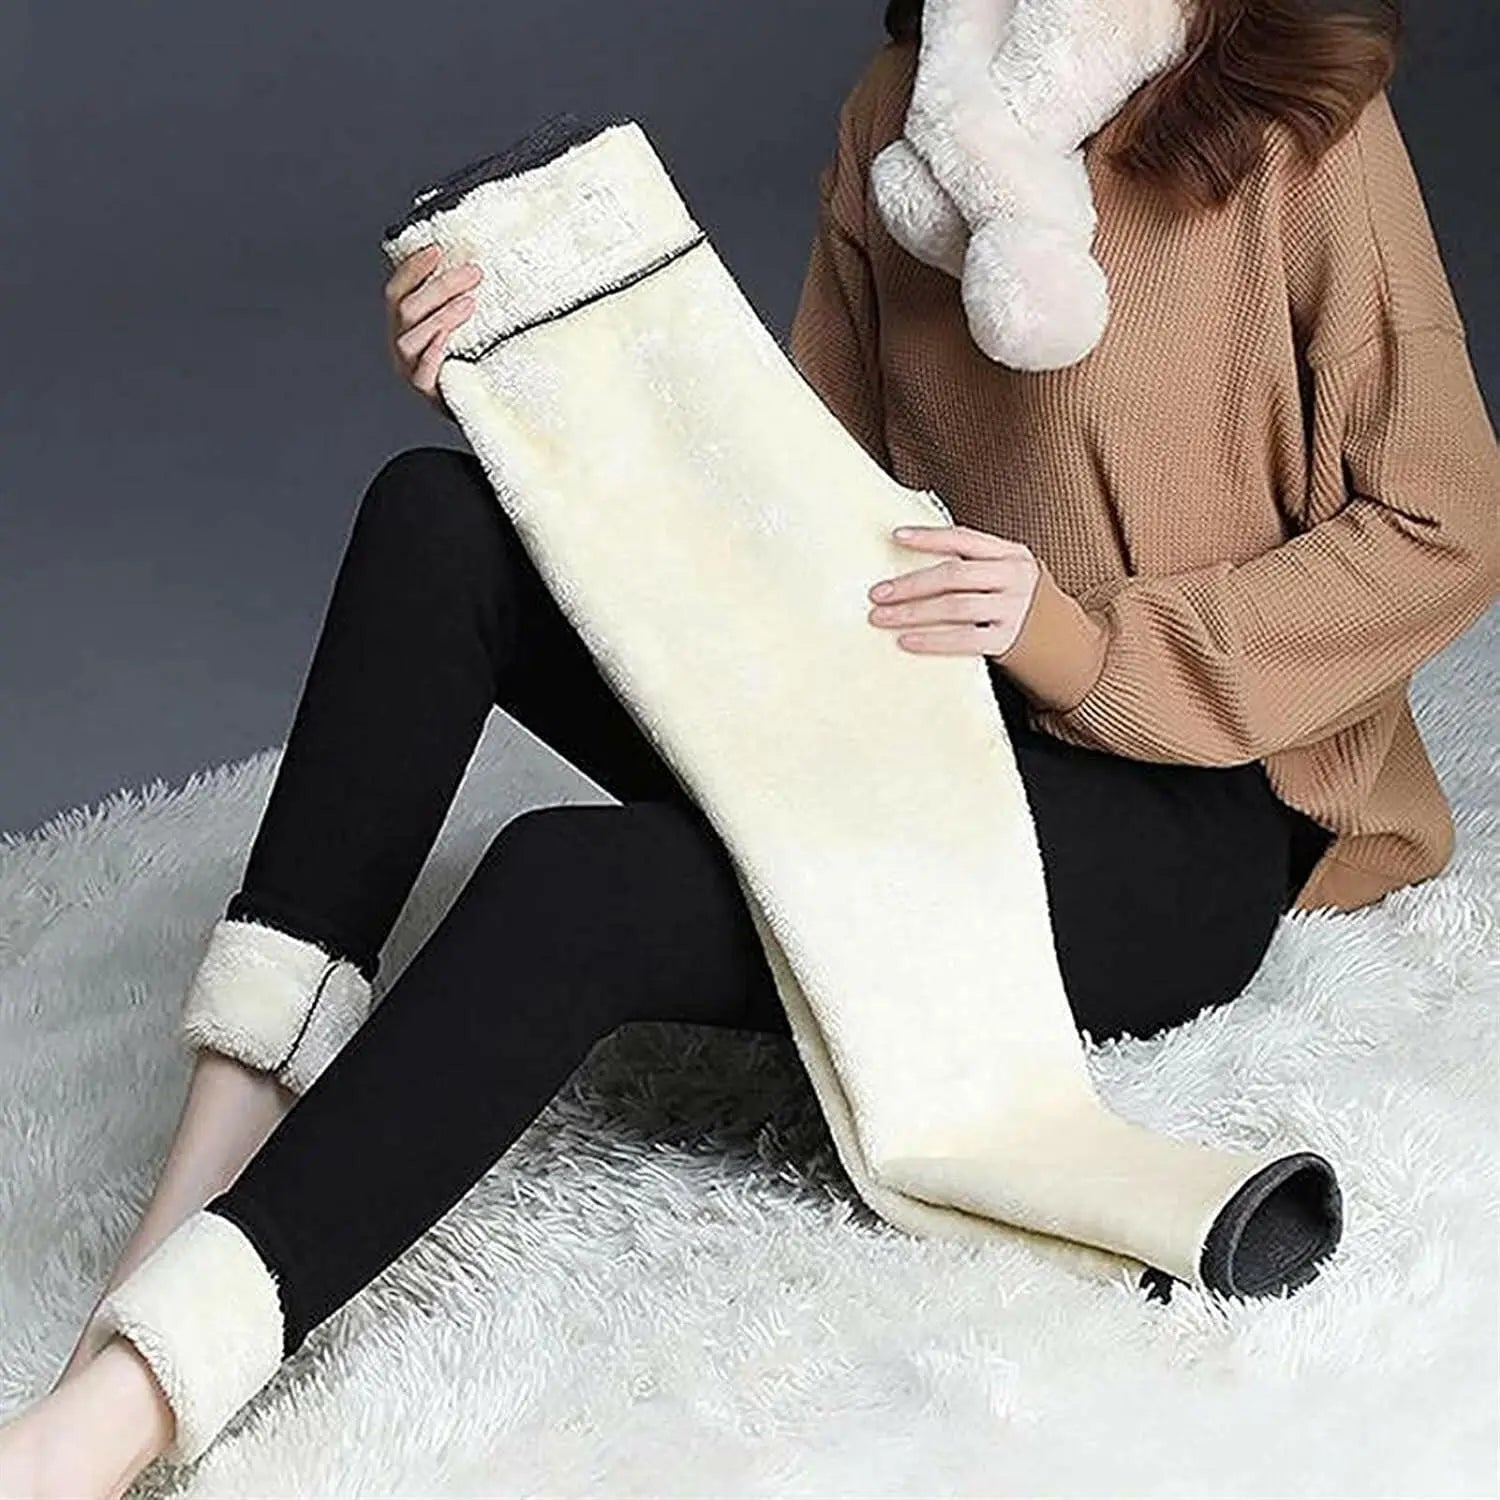 Super Thick Cashmere Leggings for Women, Winter Sherpa Fleece Lined High Waist Stretchy Leggings Plush Warm Thermal Pants